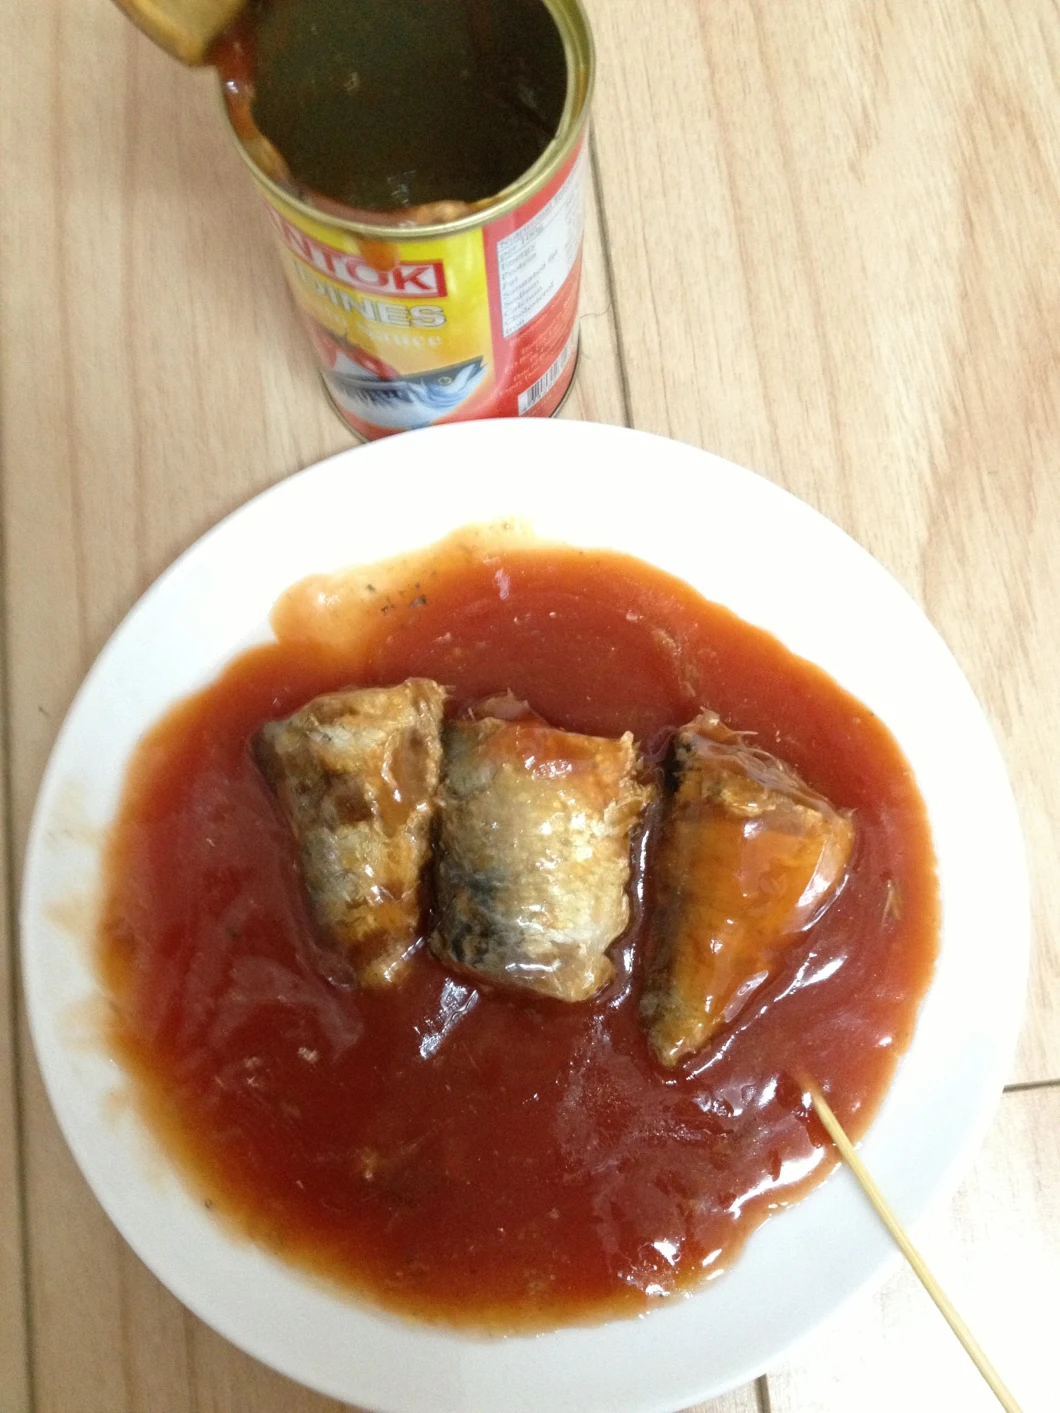 Fresh Meat Canned Sardine in Tomato Sauce and Able to Be Eaten by Pets